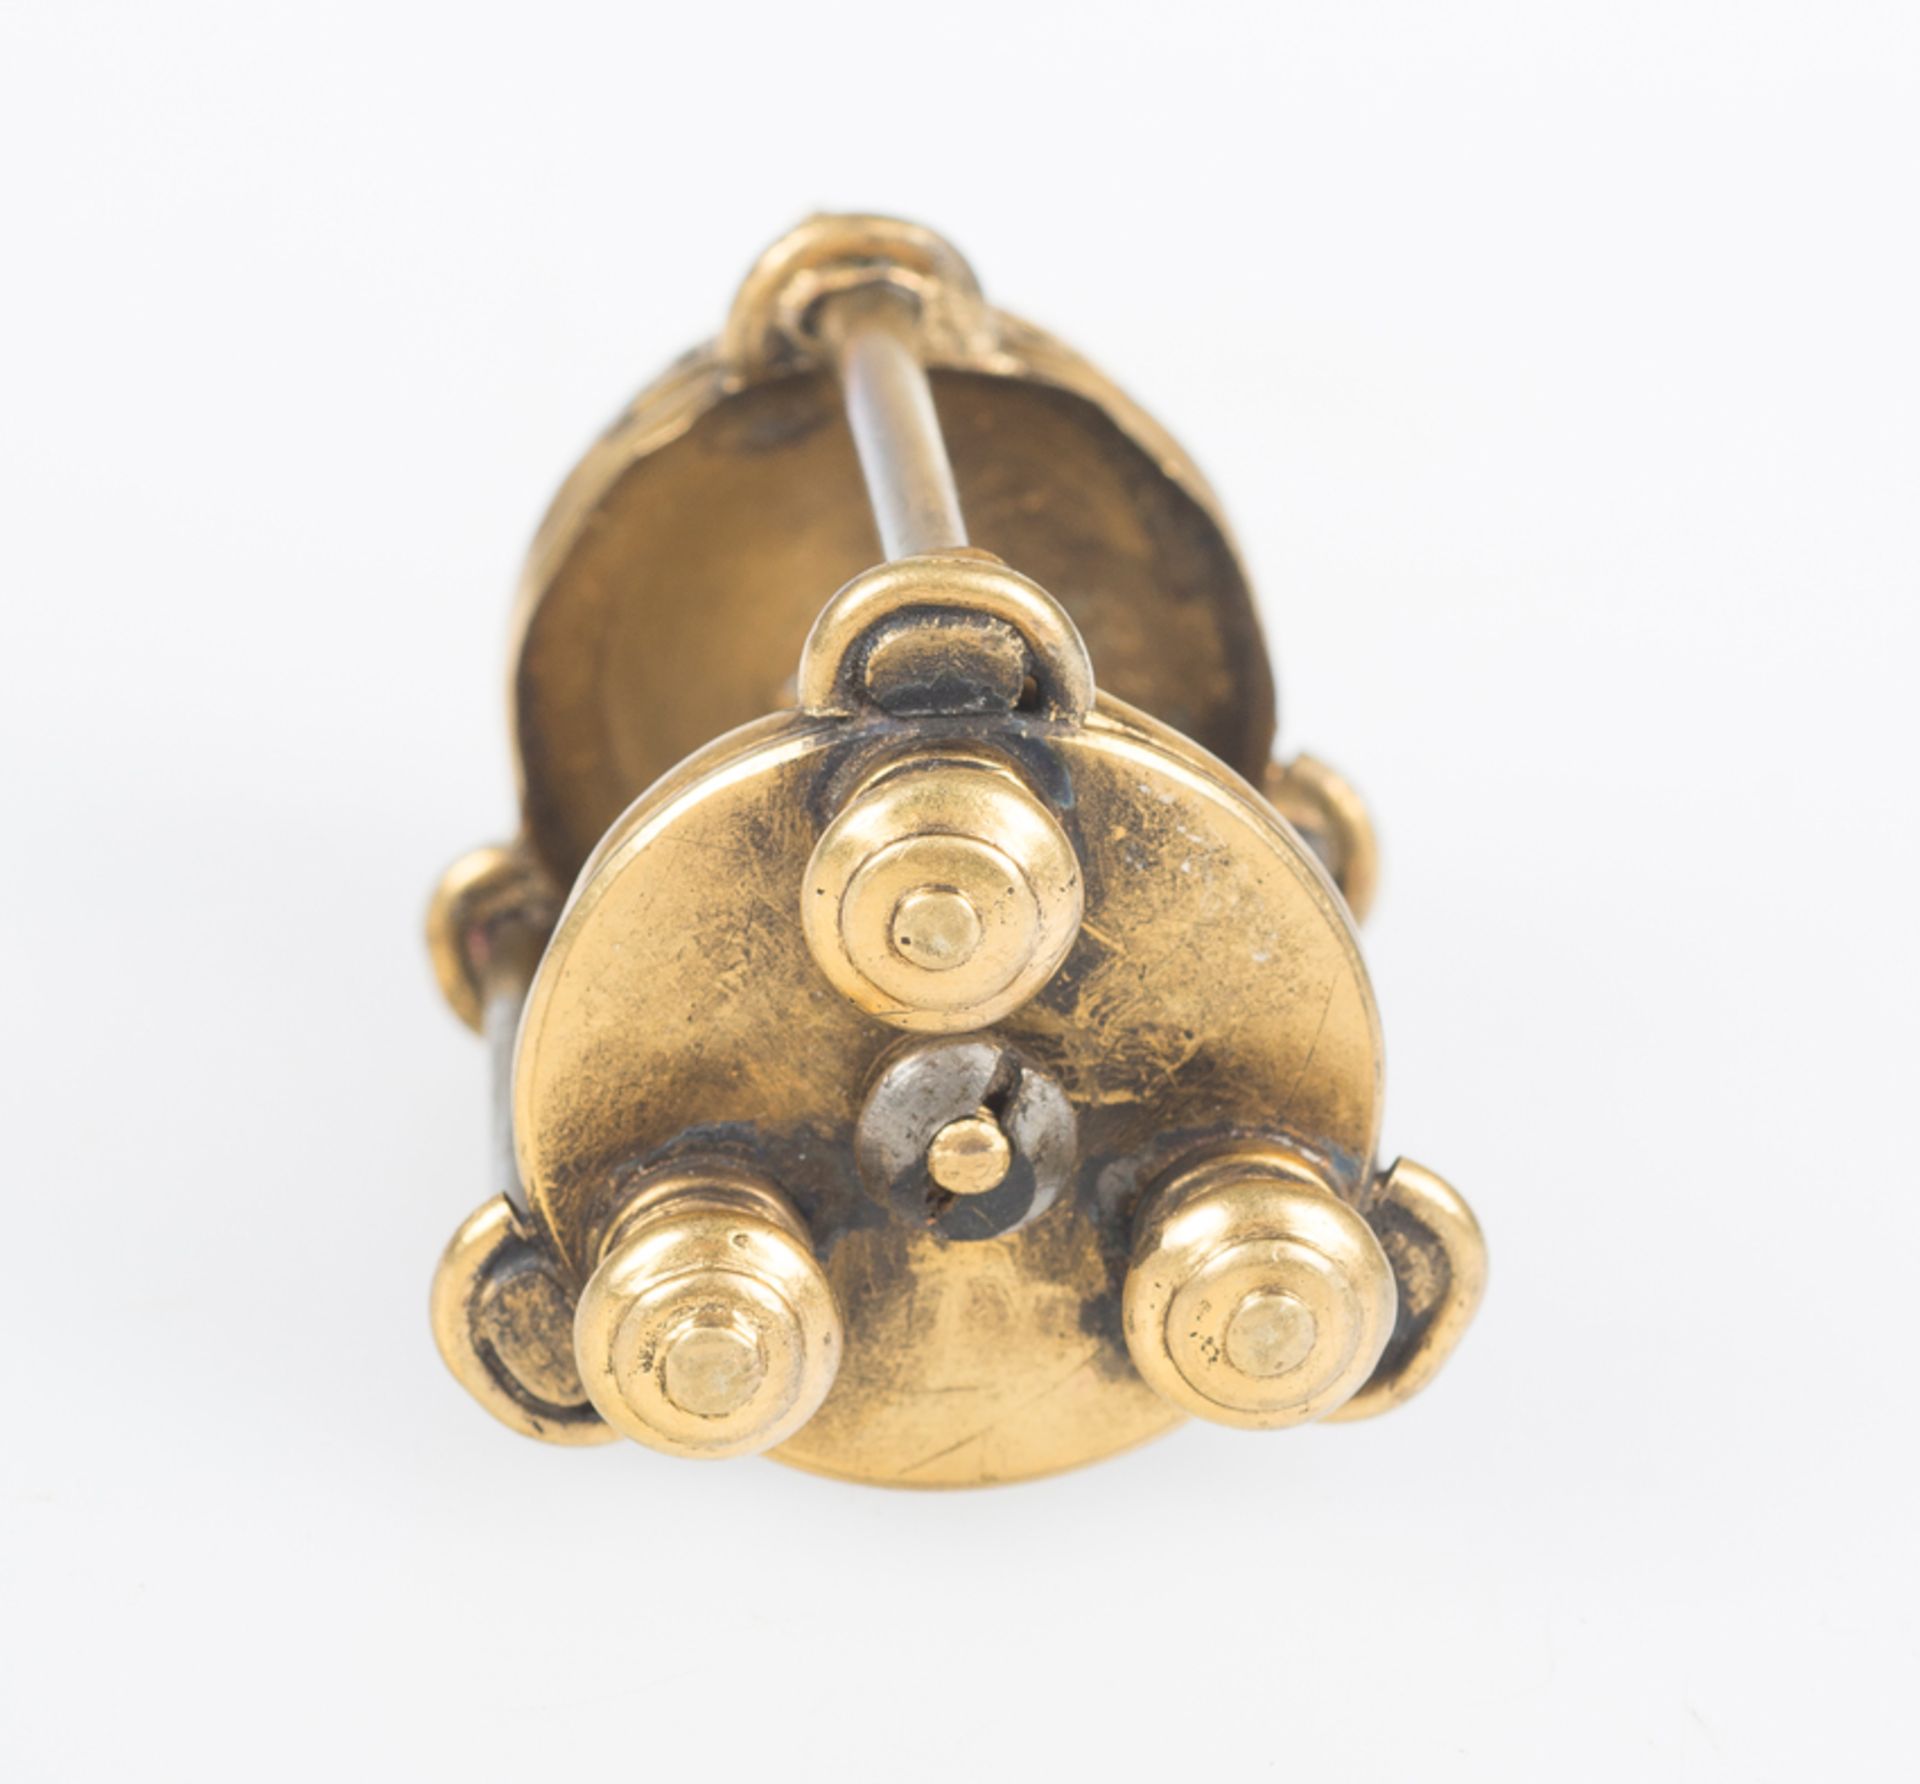 Small gilded bronze and tortoiseshell shrine pendant. Spain or Italy. 16th century. - Image 5 of 6